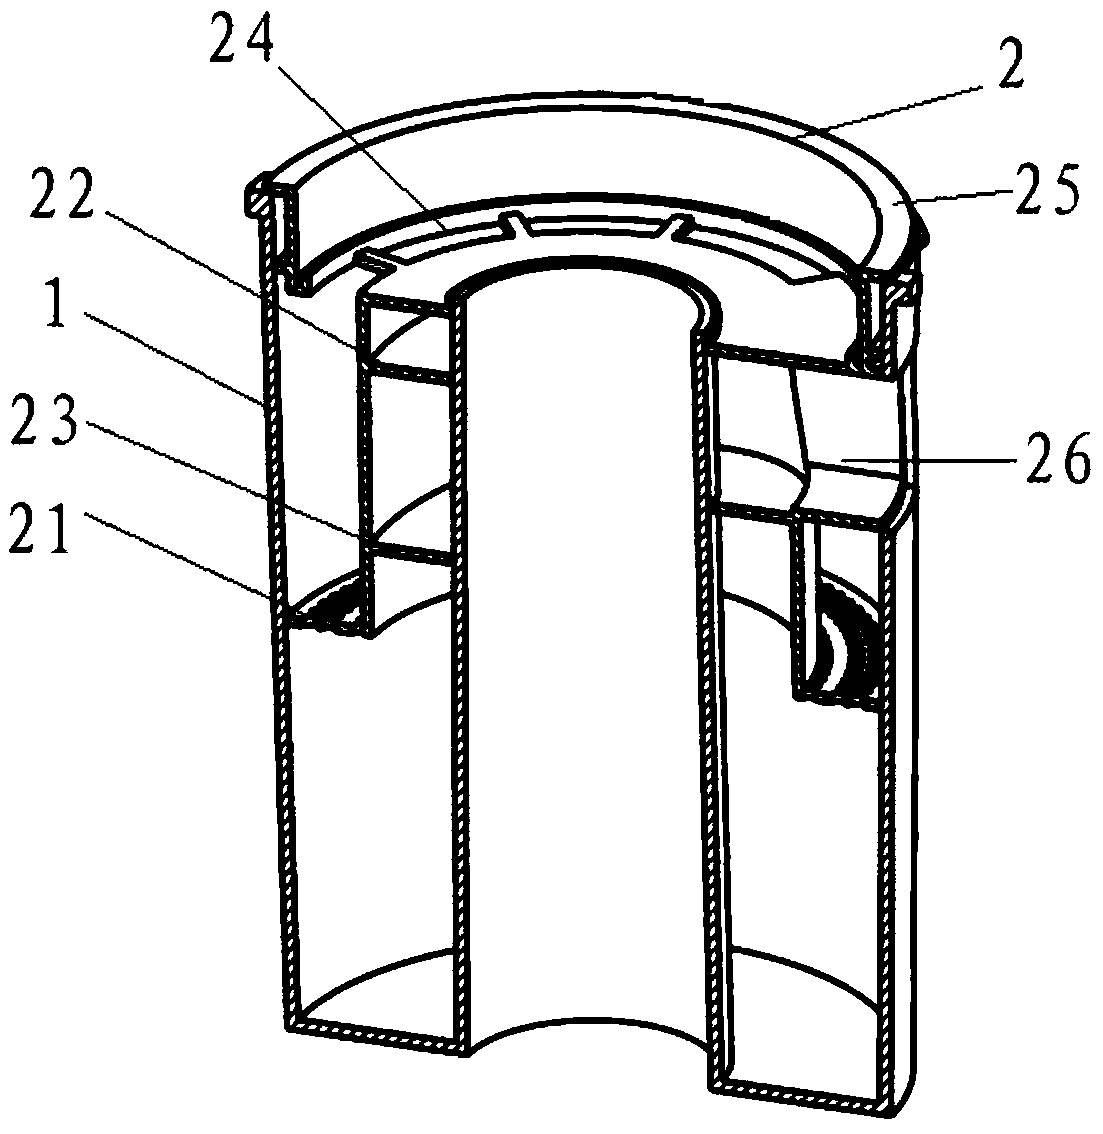 Cyclone separation device and air purification device